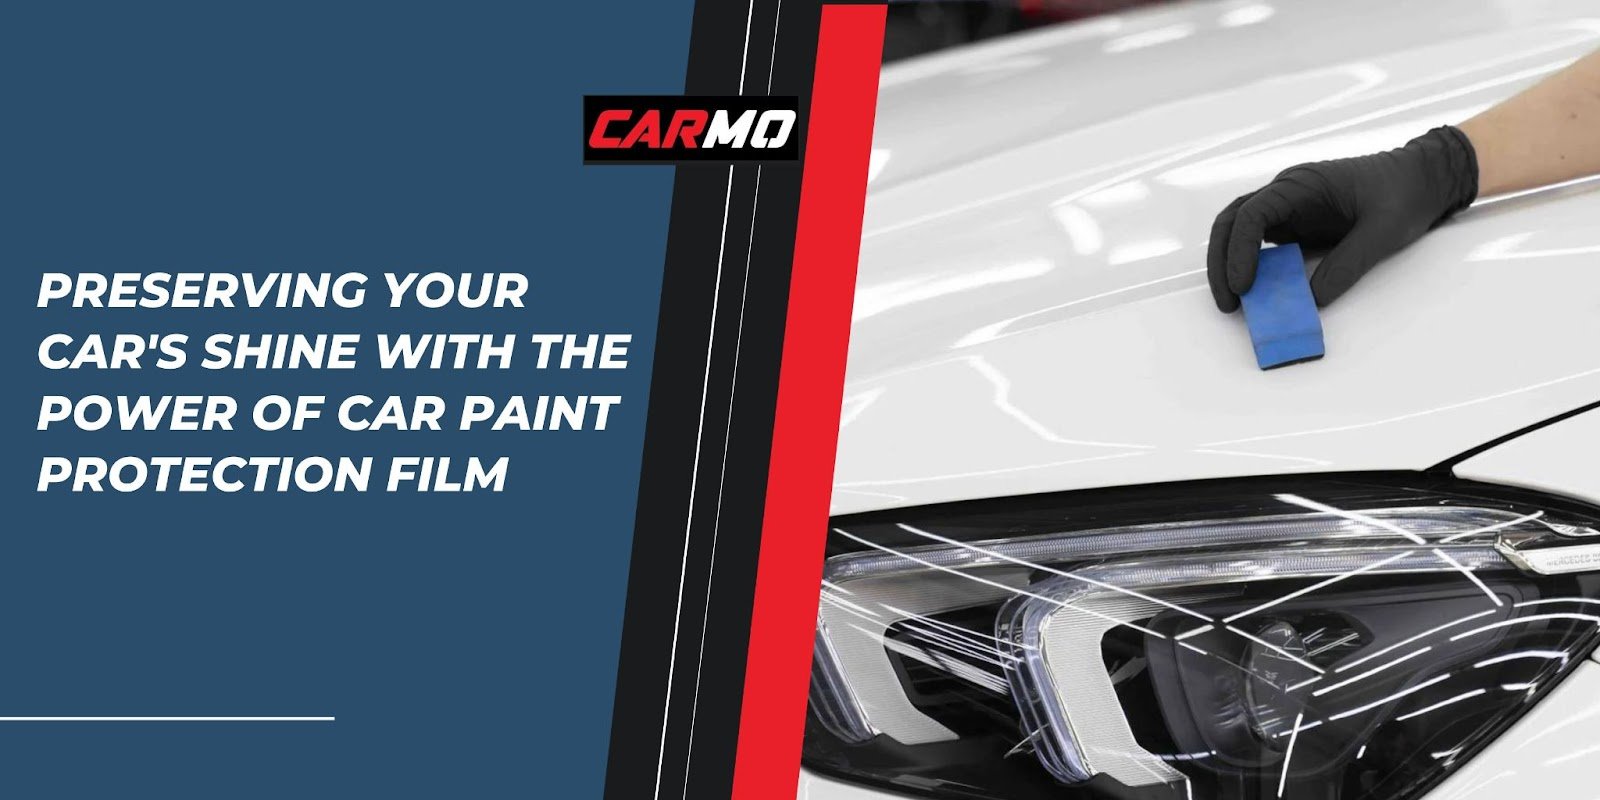 Ceramic Coating Guide: Selecting the Ideal Product for Beginners